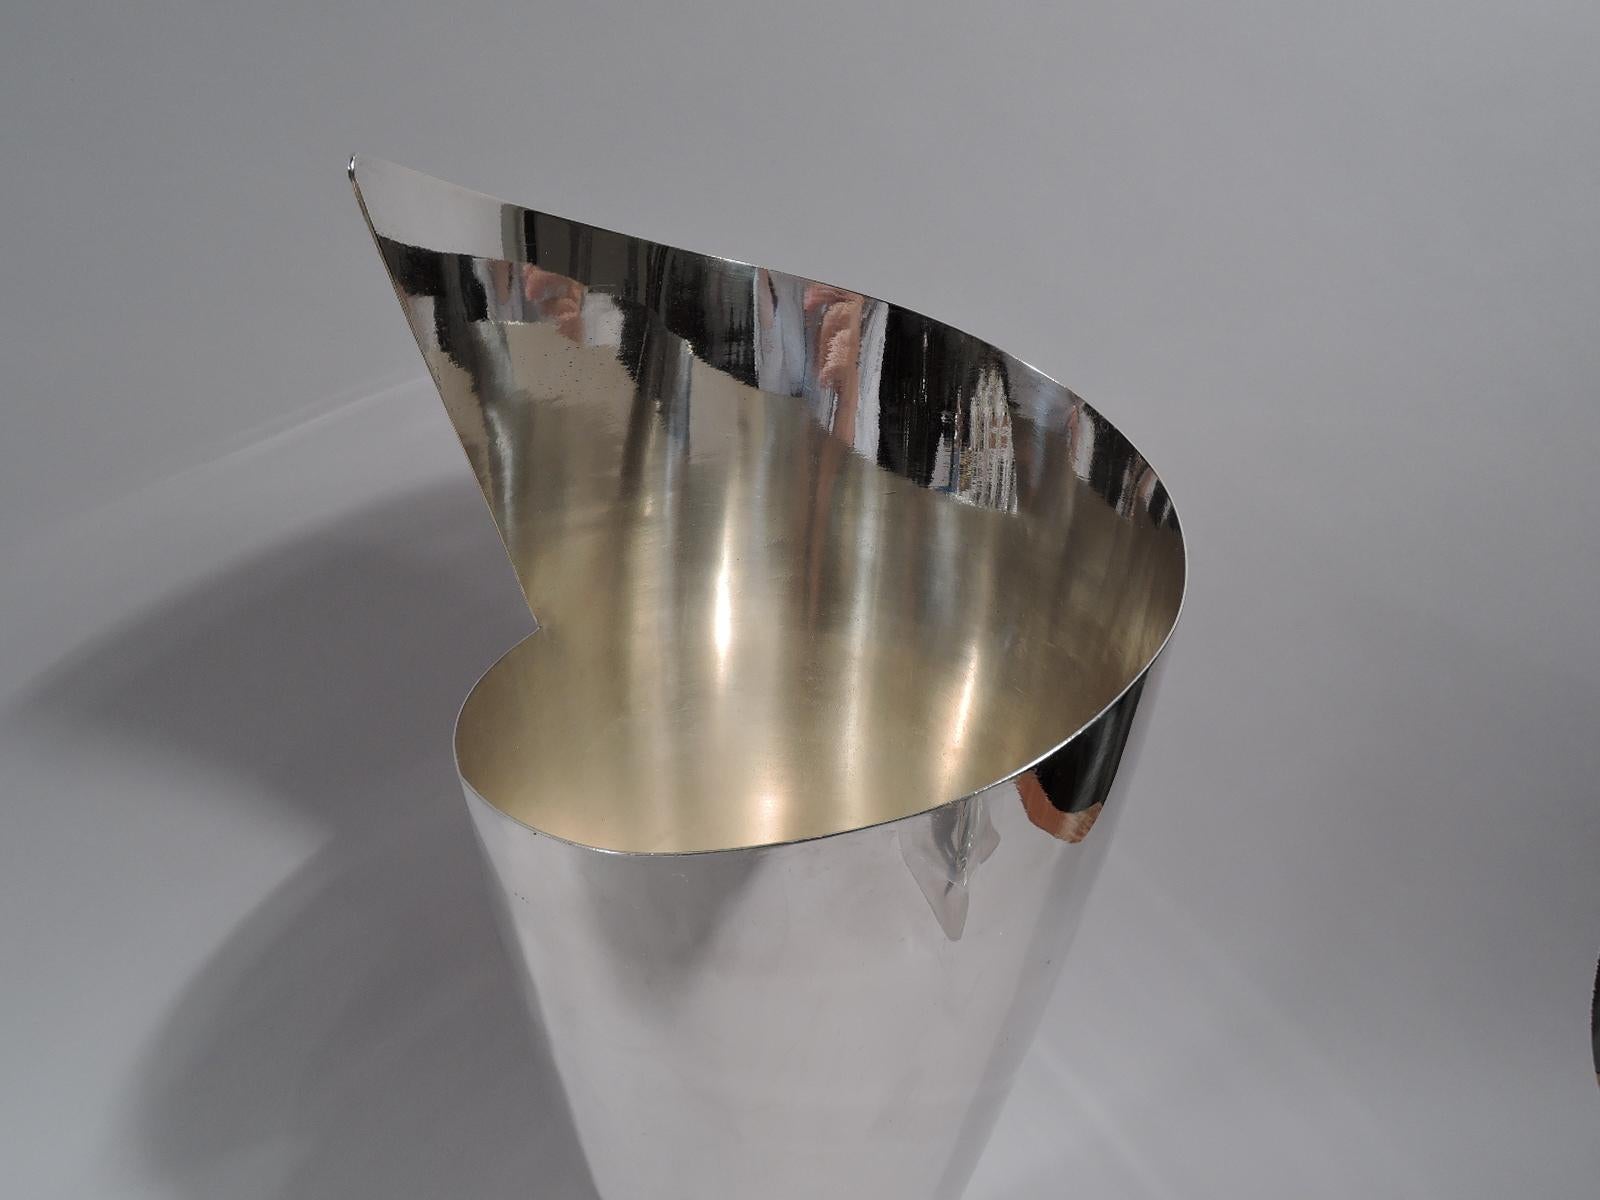 Truly fabulous French Art Deco silver plate vase, circa 1930. A cone mounted to a square. Mouth asymmetrical with cutaway triangle. Swooshing geometry that is suggestive of a paper wrapper. Marked “Desny Paris / Made in France / Déposé”.